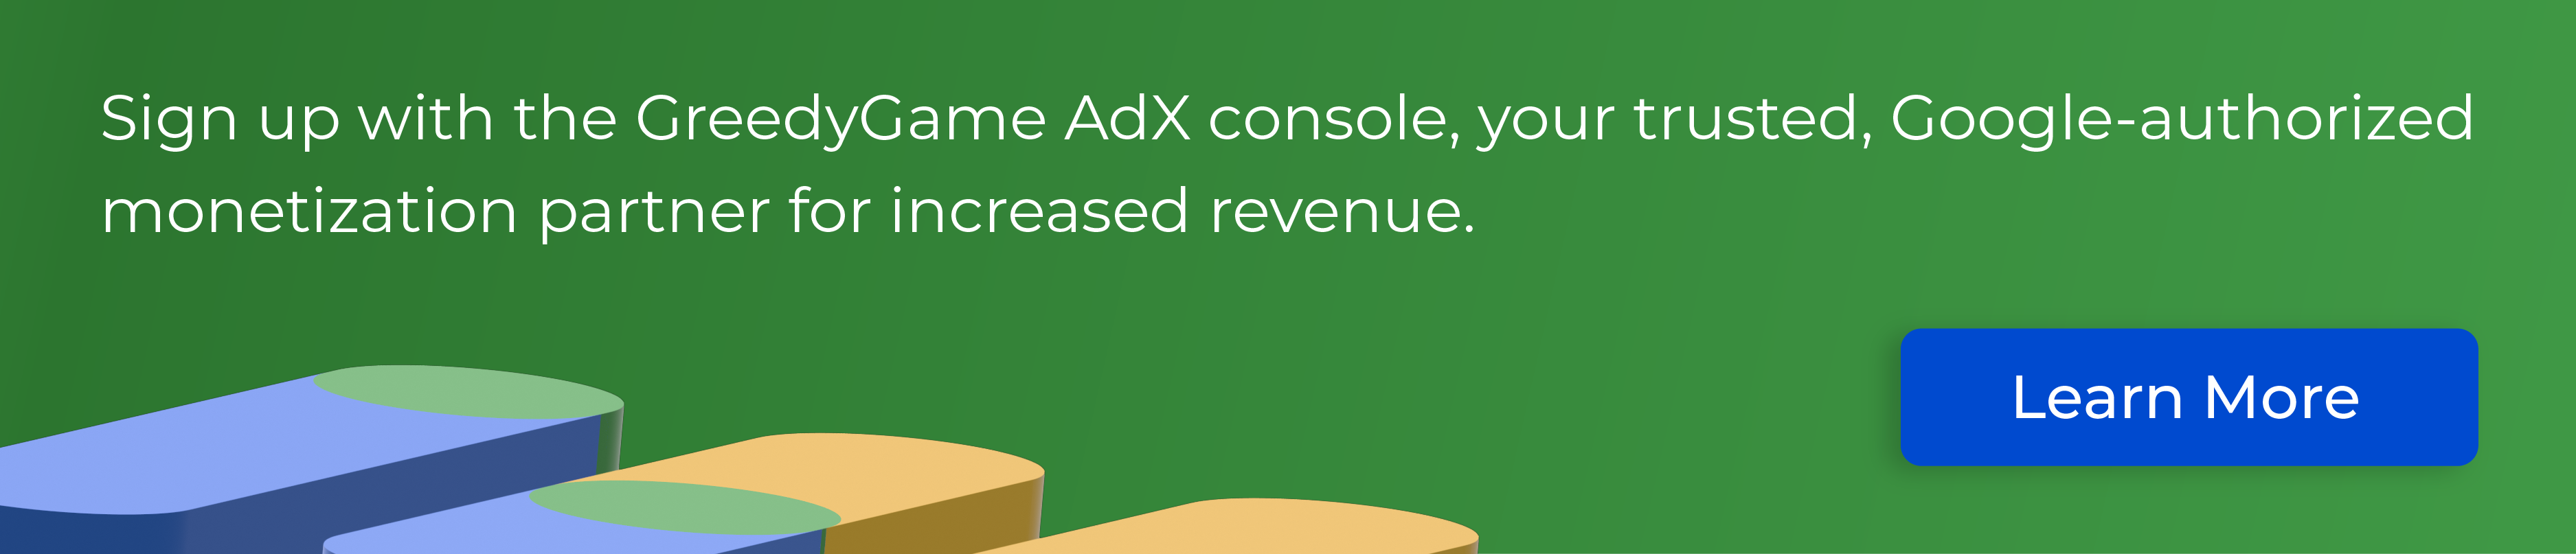 Sign up with the GreedyGame AdX console